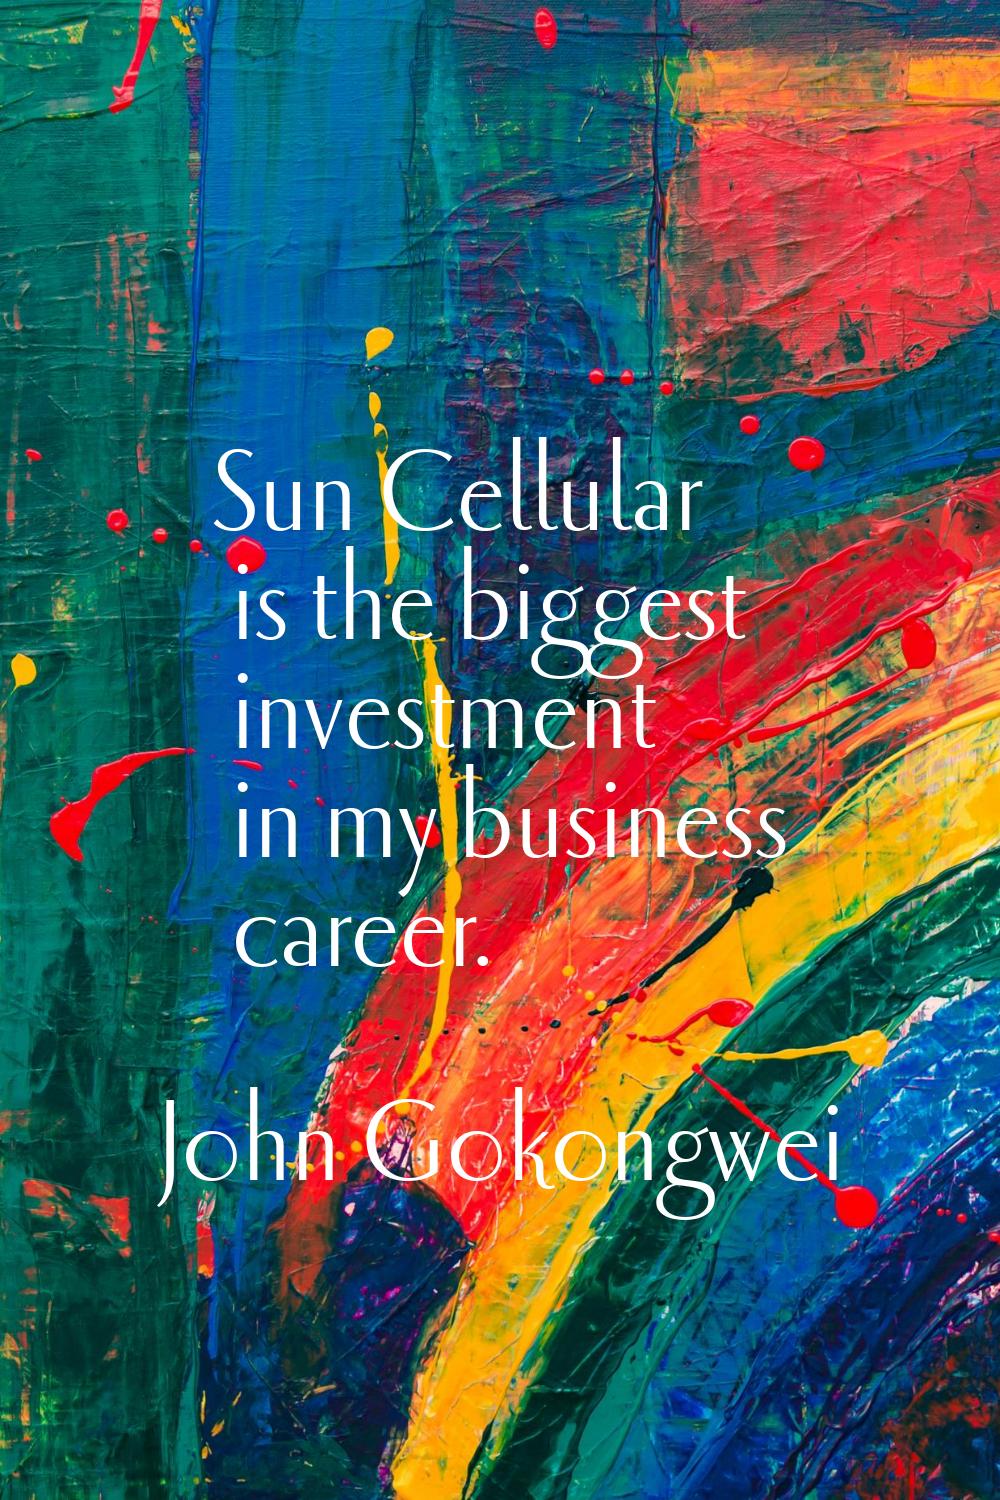 Sun Cellular is the biggest investment in my business career.